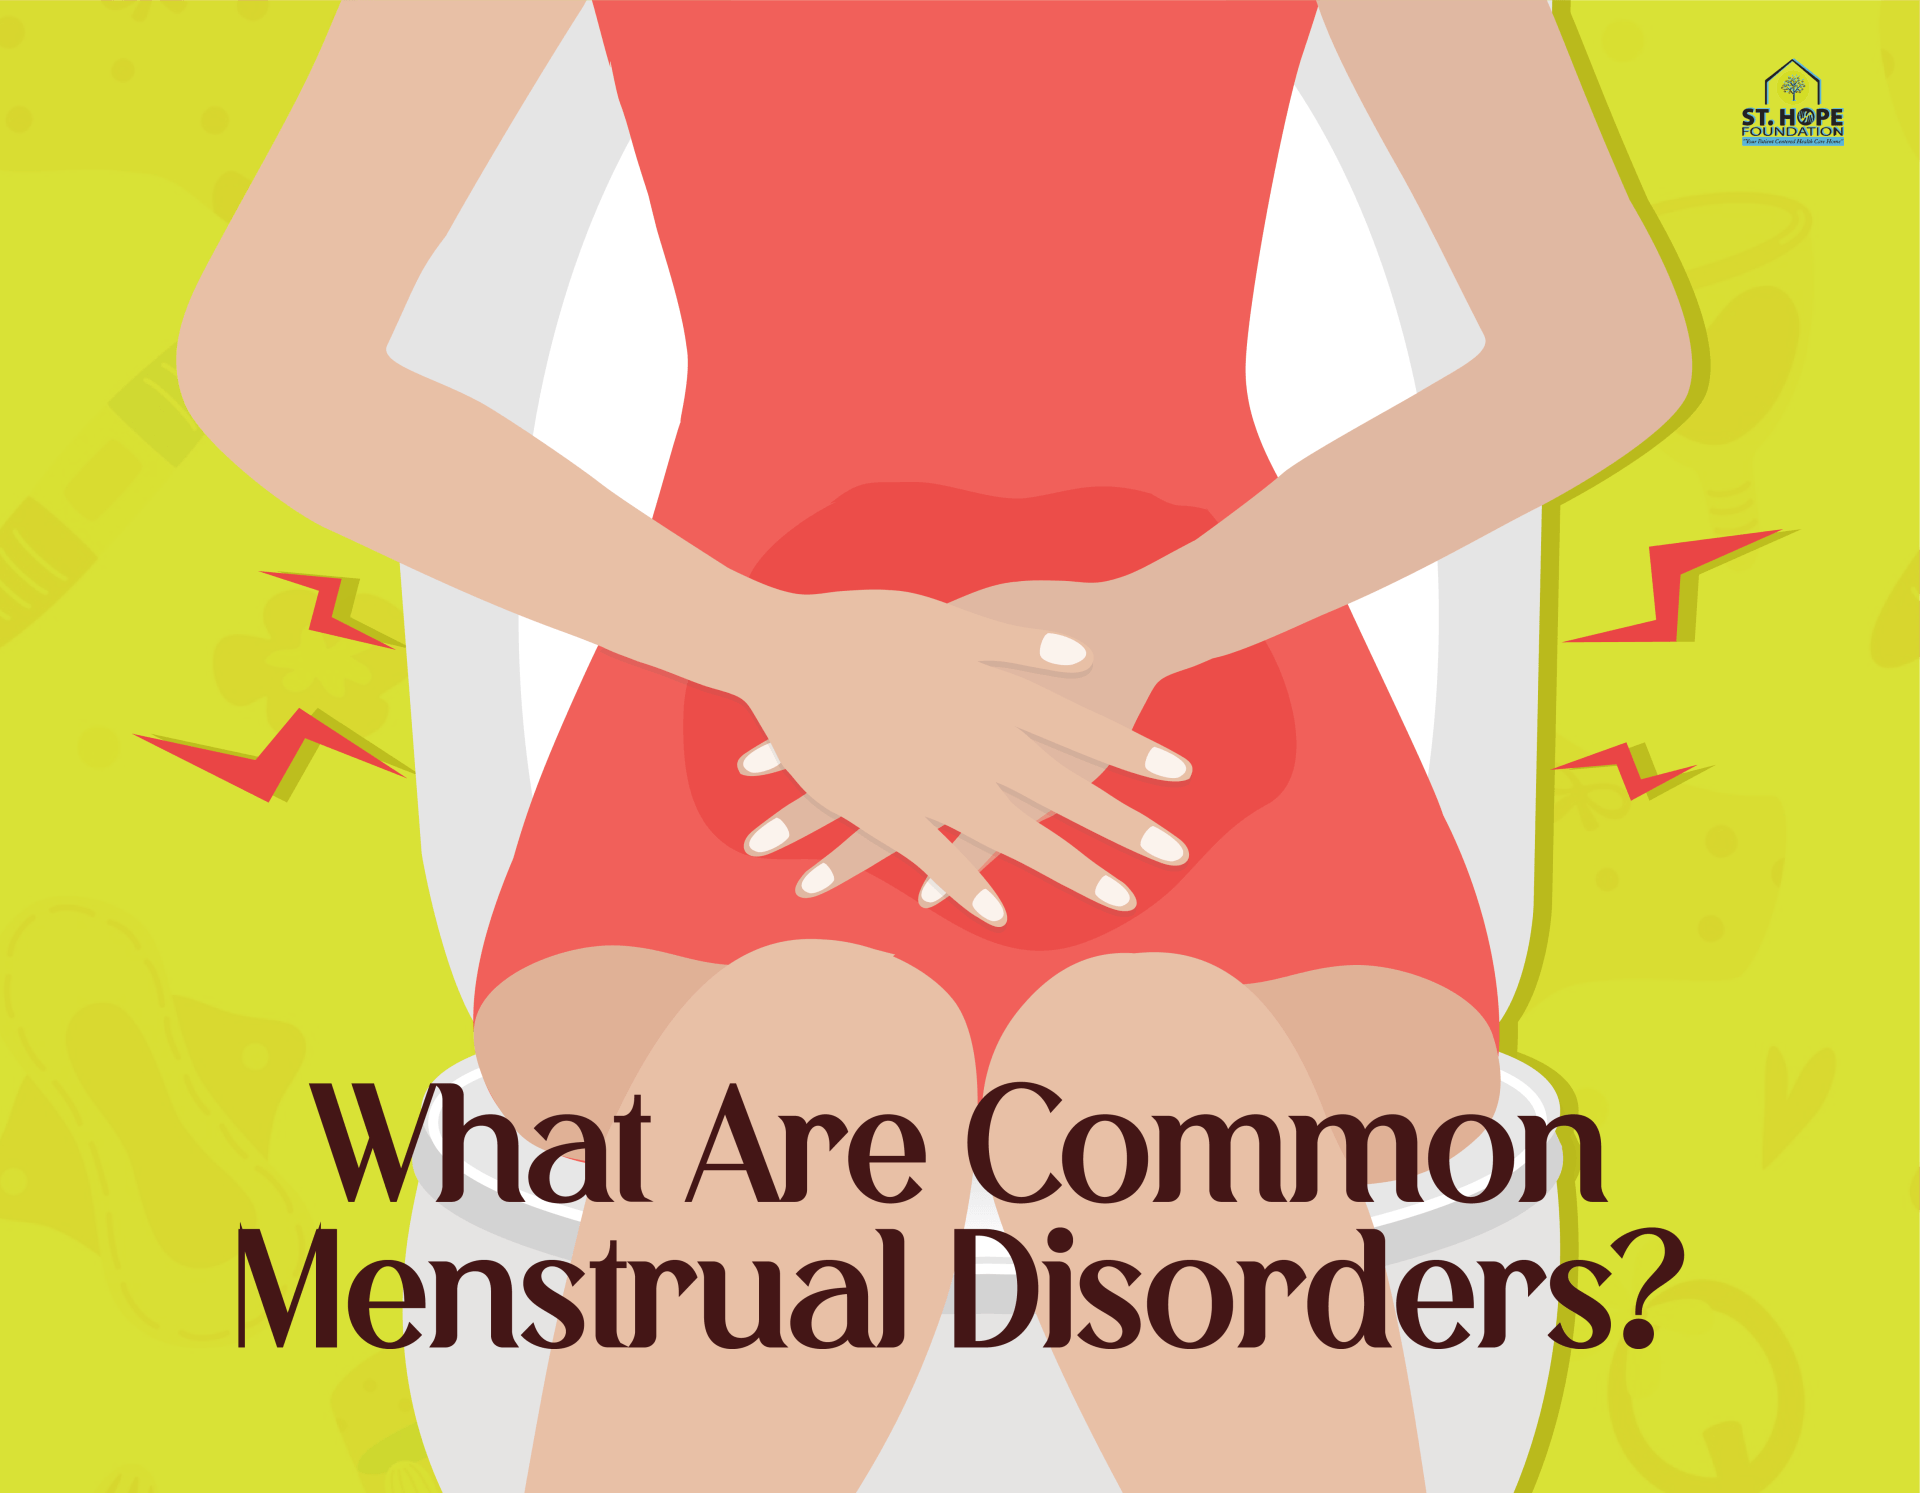 common menstrual disorders and issues